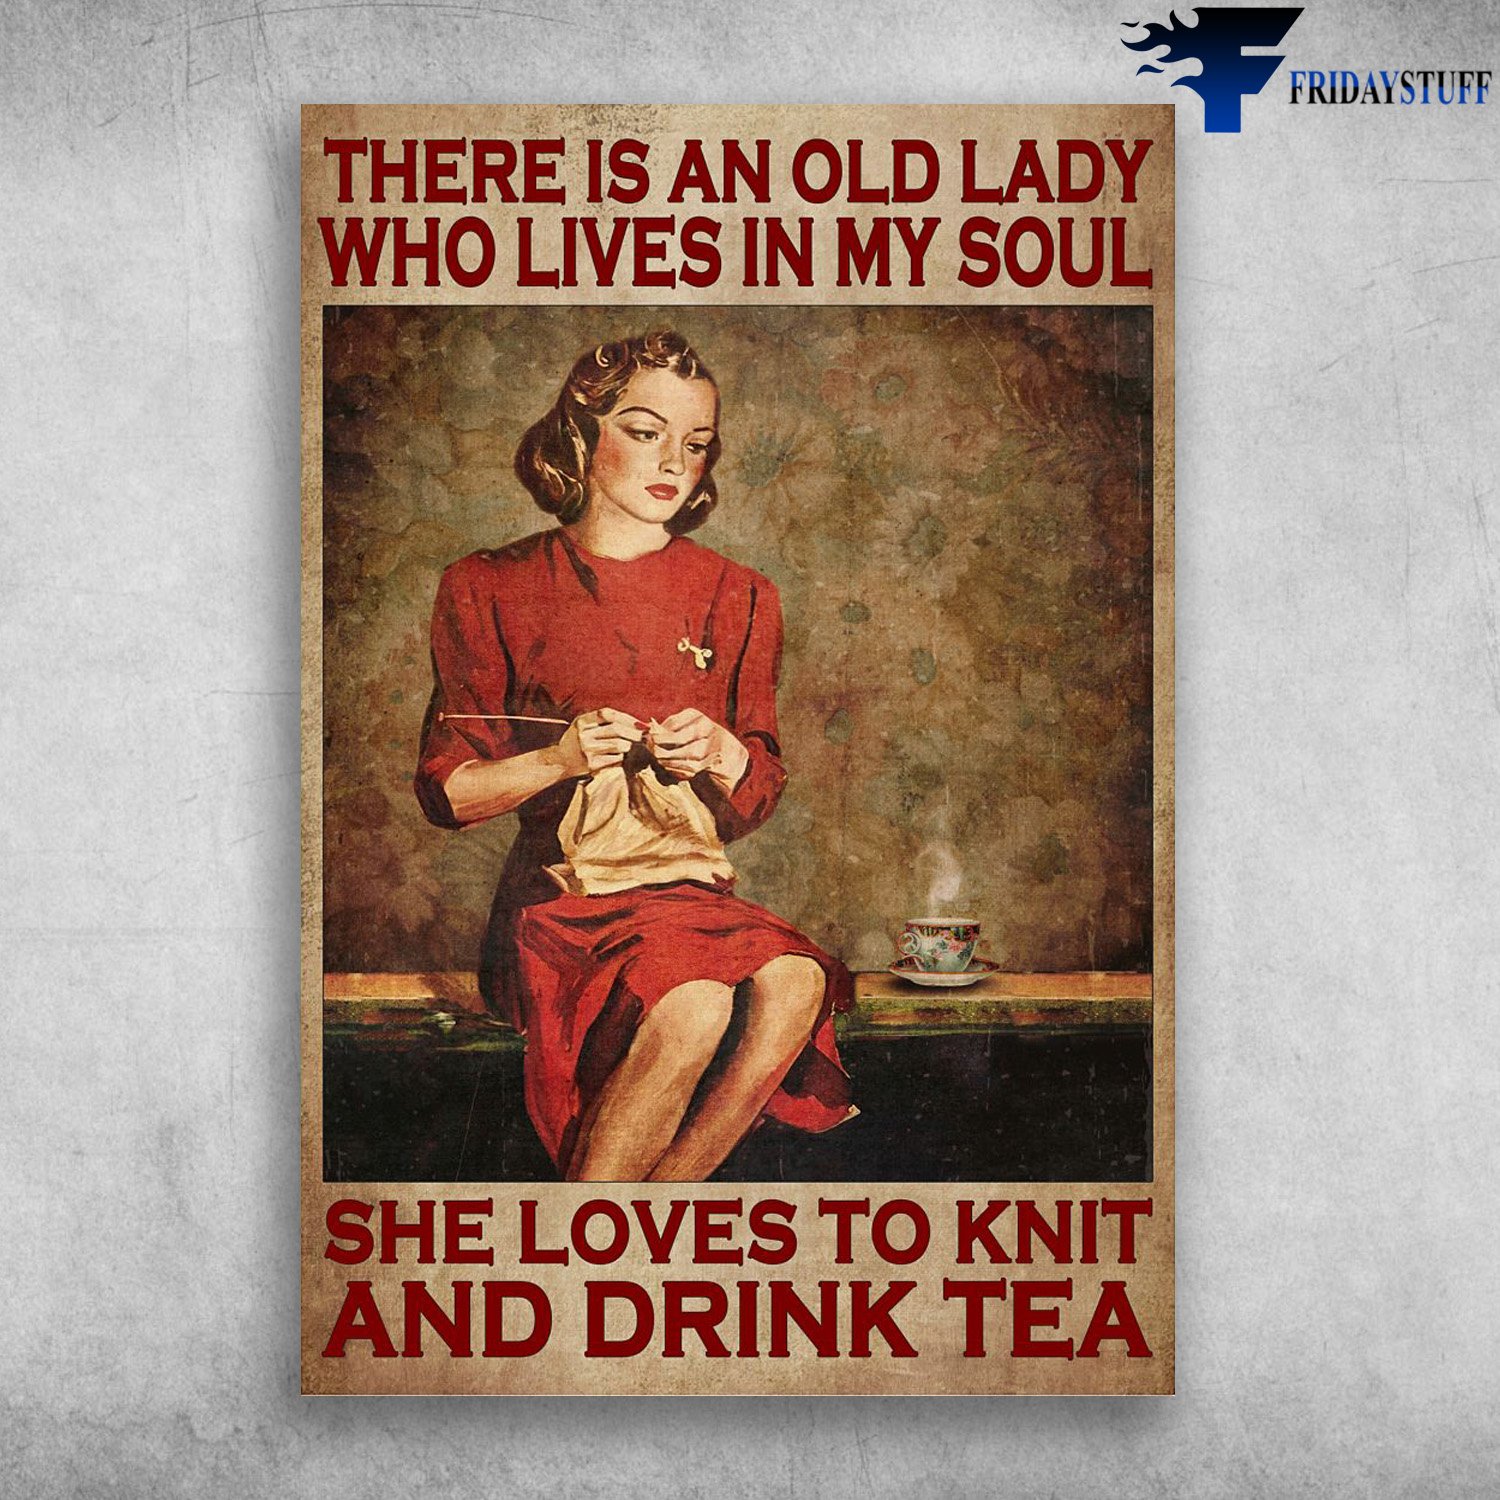 Lady Loves Knit And Tea - There Is An Old Lady, Who Lives In My Soul, She Loves To Knit, And Drink Tea